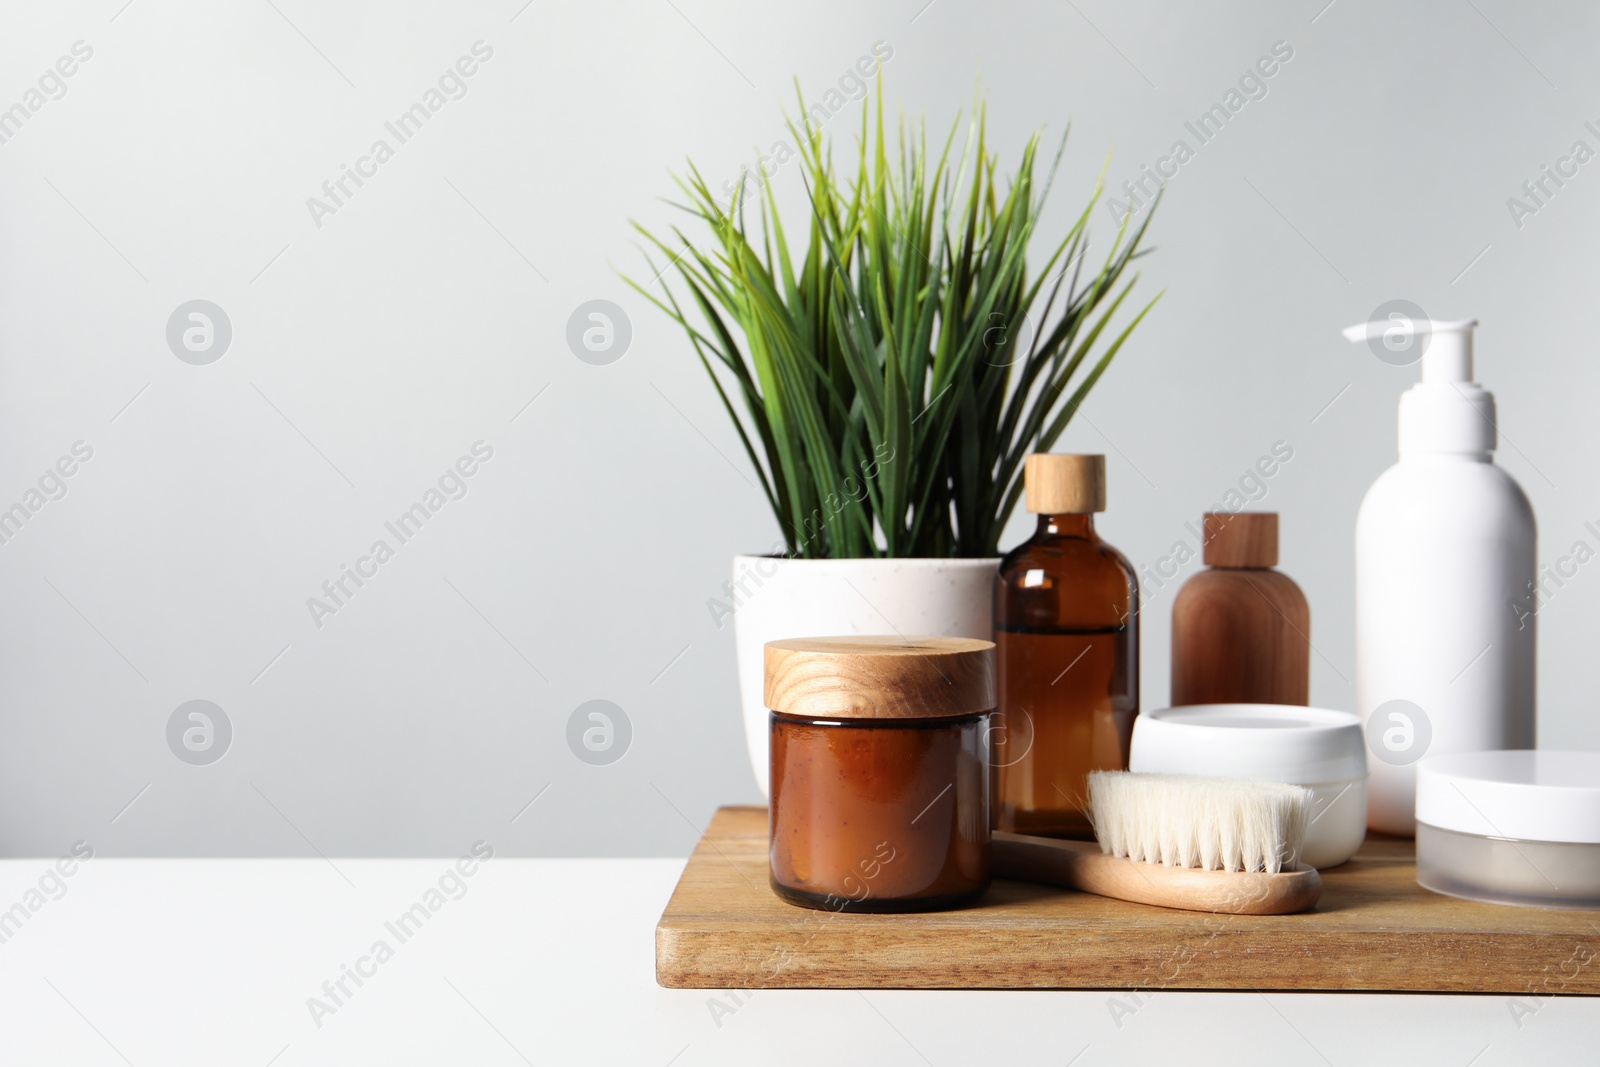 Photo of Different bath accessories and houseplant on white table against grey background. Space for text